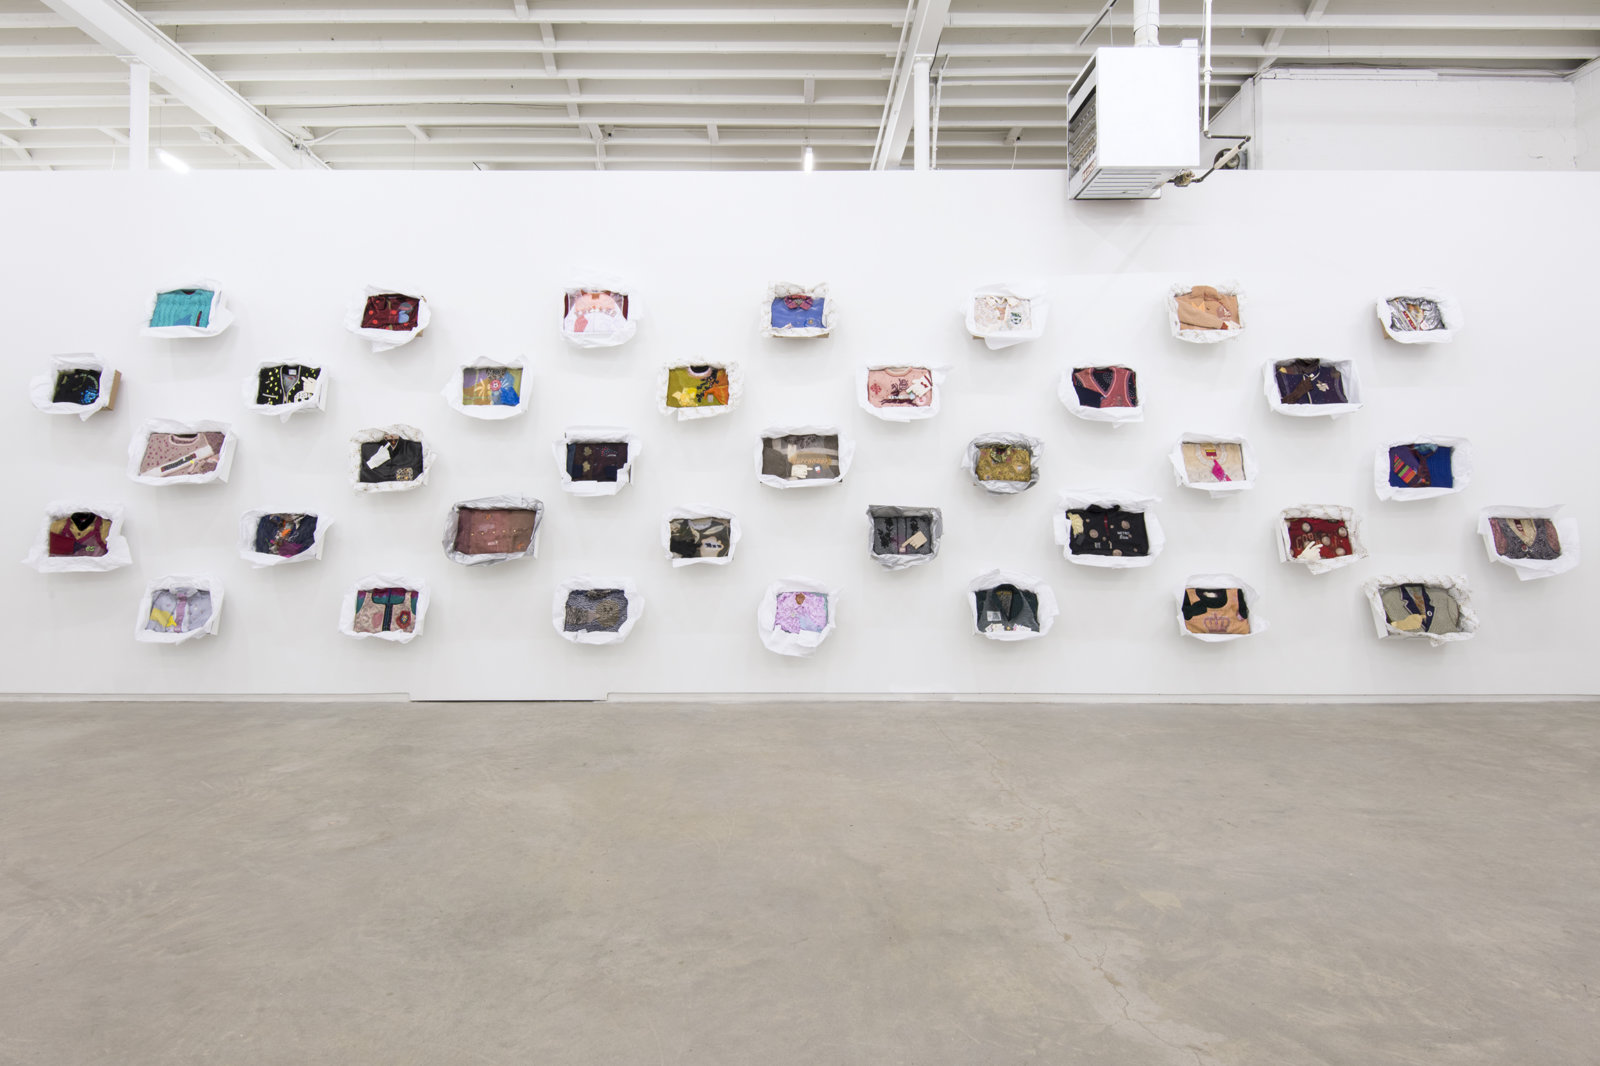 Liz Magor, Being This, 2012, 36 boxes, paper, textiles, found materials, each box approximately 12 x 19 x 3 in. (31 x 48 x 6 cm), installation dimensions variable